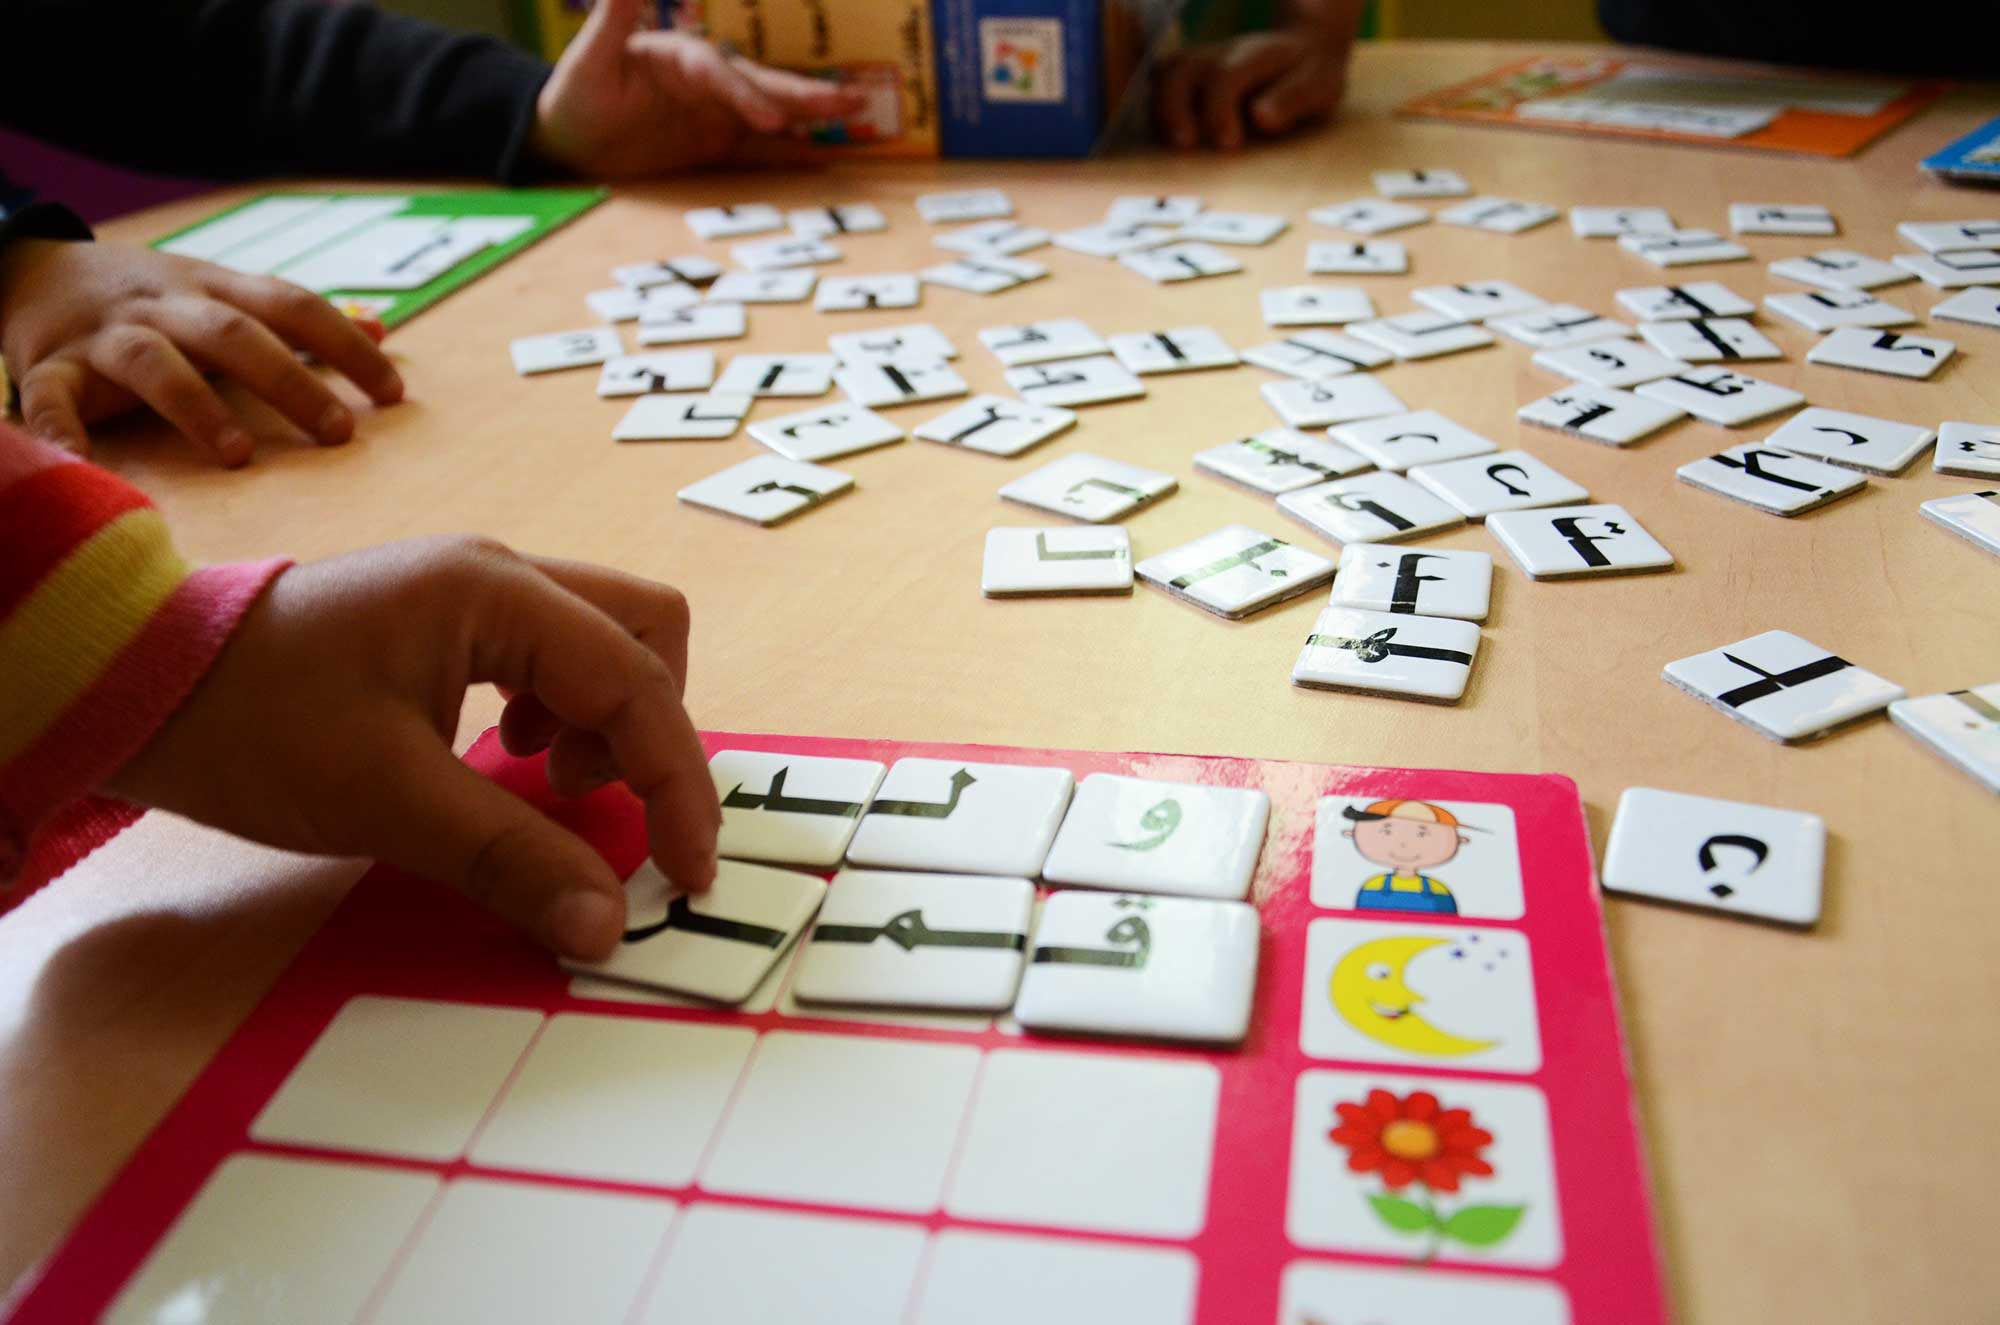 Children learn Arabic words and their spellings with fun, colorful games.